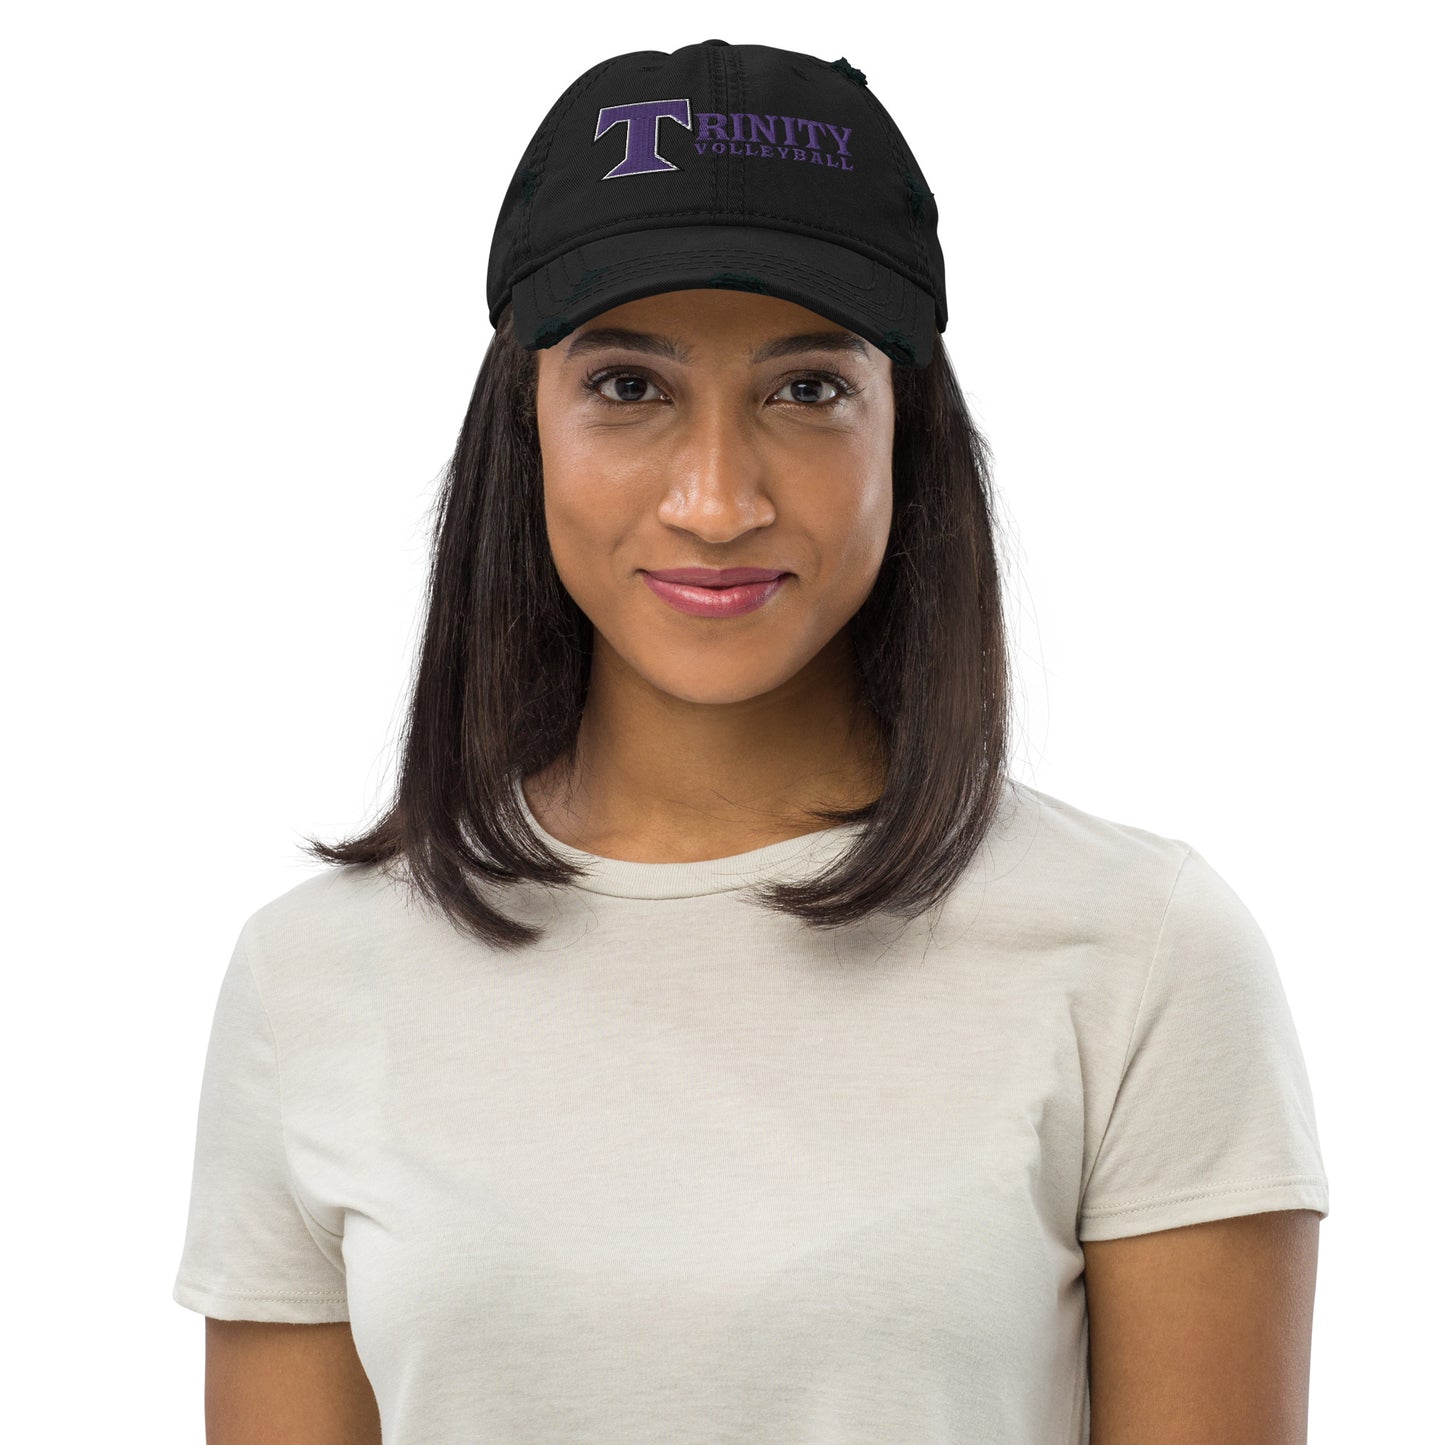 Trinity VB Embroidered Distressed Cap